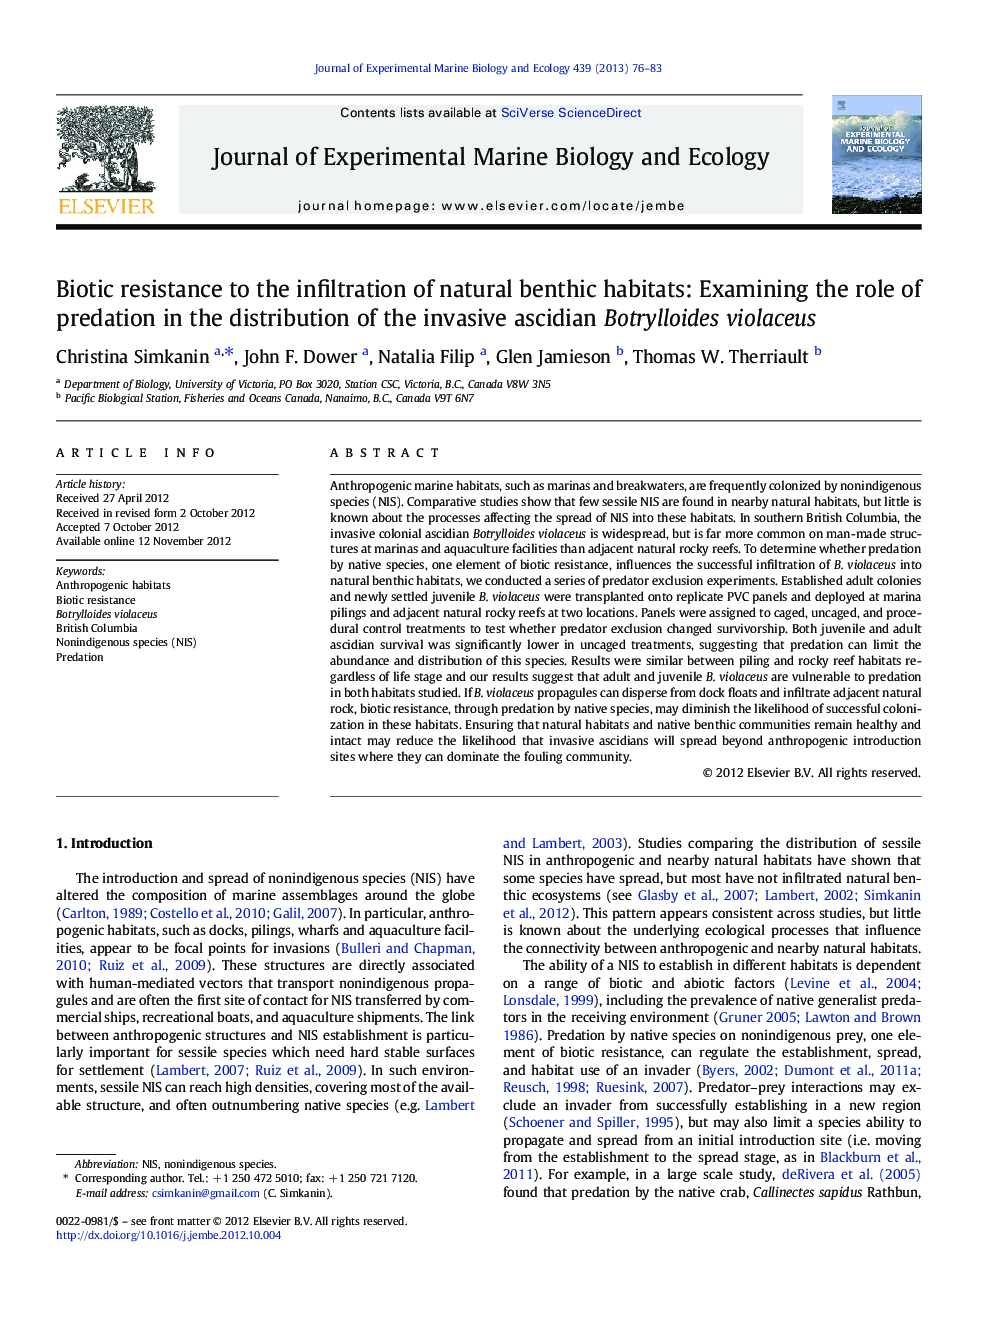 Biotic resistance to the infiltration of natural benthic habitats: Examining the role of predation in the distribution of the invasive ascidian Botrylloides violaceus